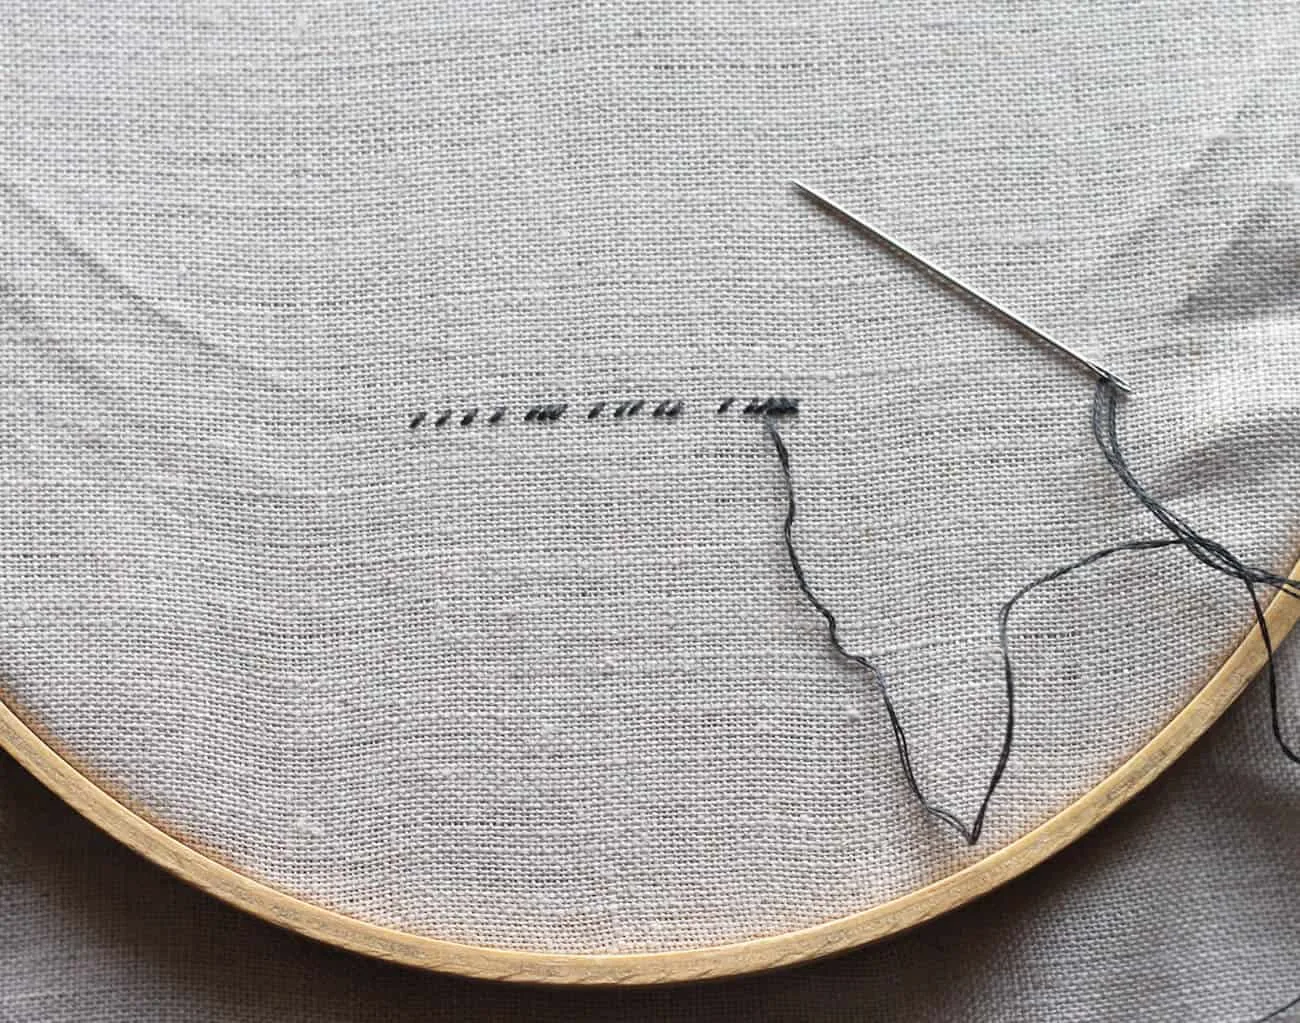 Linen in an embroidery hoop and stitching with black embroidery floss